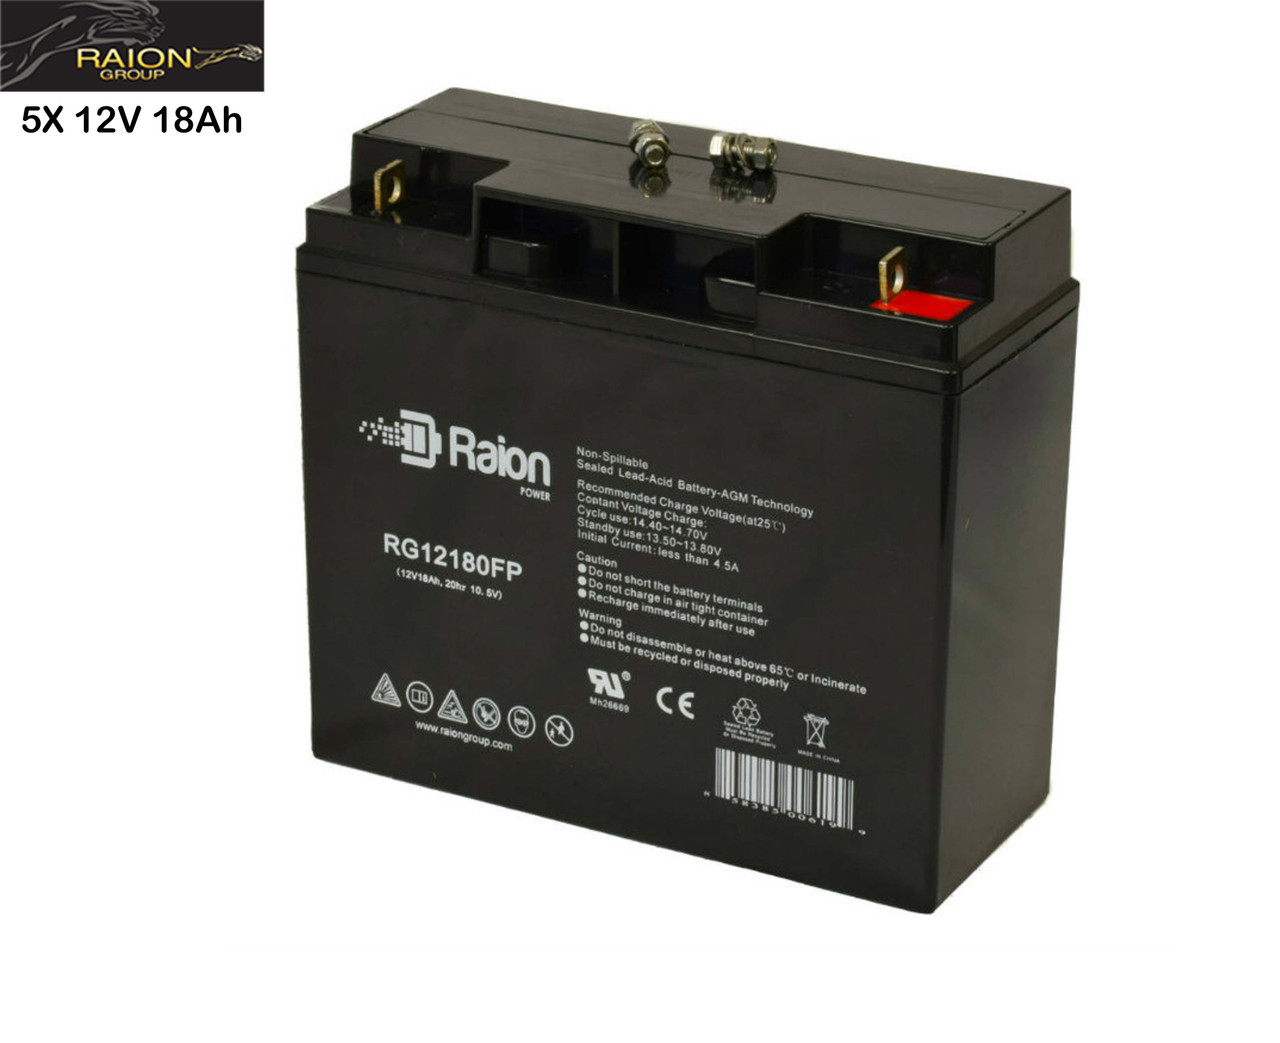 Raion Power Replacement 12V 18Ah Battery for Luyuan MNL2-CS6020-Z5 - 5 Pack